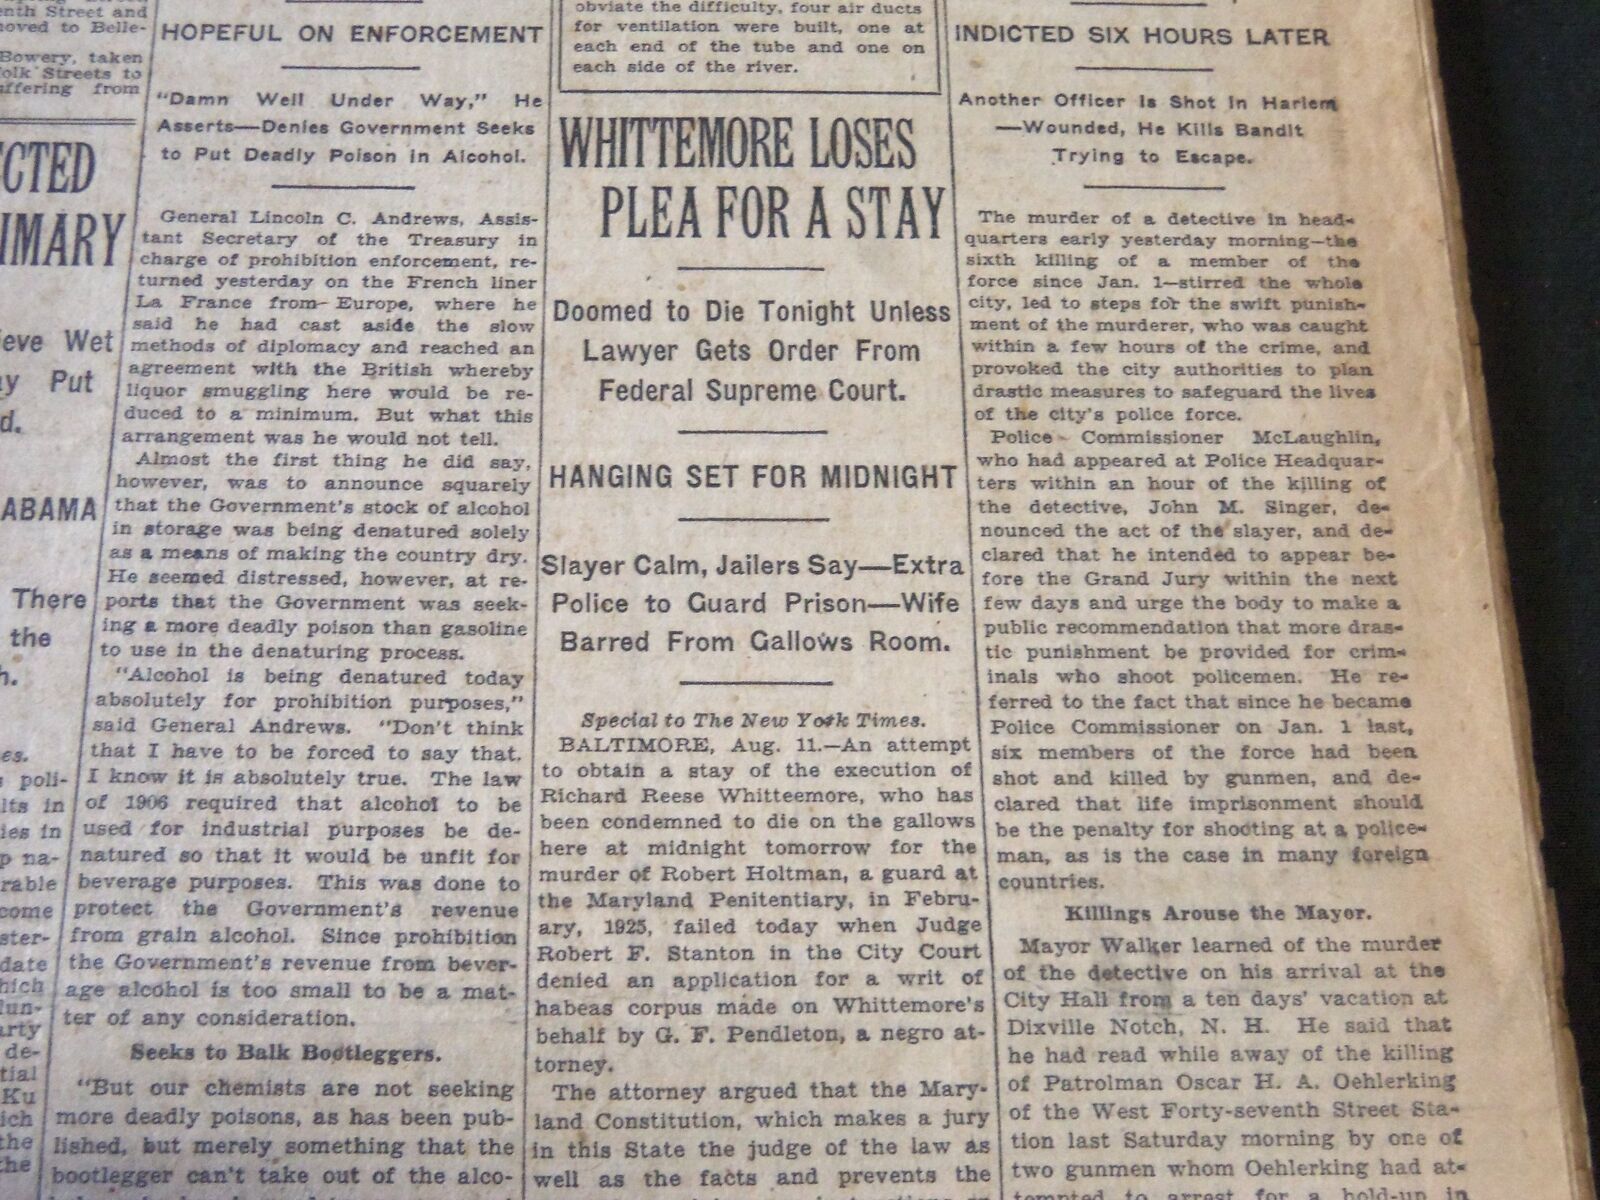 1926 AUGUST 12 NEW YORK TIMES - WHITTEMORE LOSES PLEA FOR A STAY - NT 6602